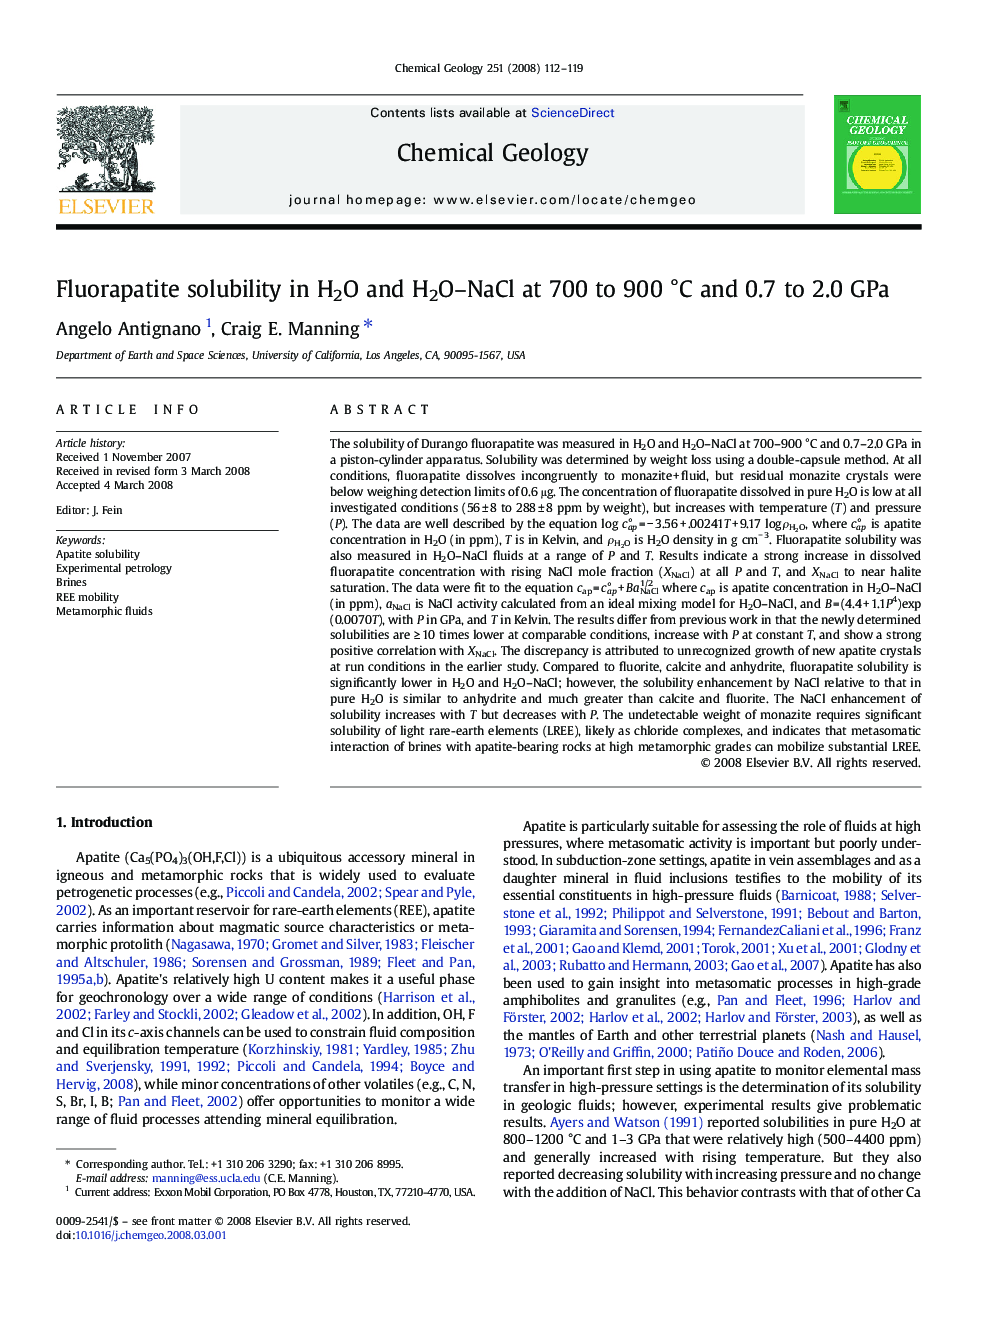 Fluorapatite solubility in H2O and H2O–NaCl at 700 to 900 °C and 0.7 to 2.0 GPa